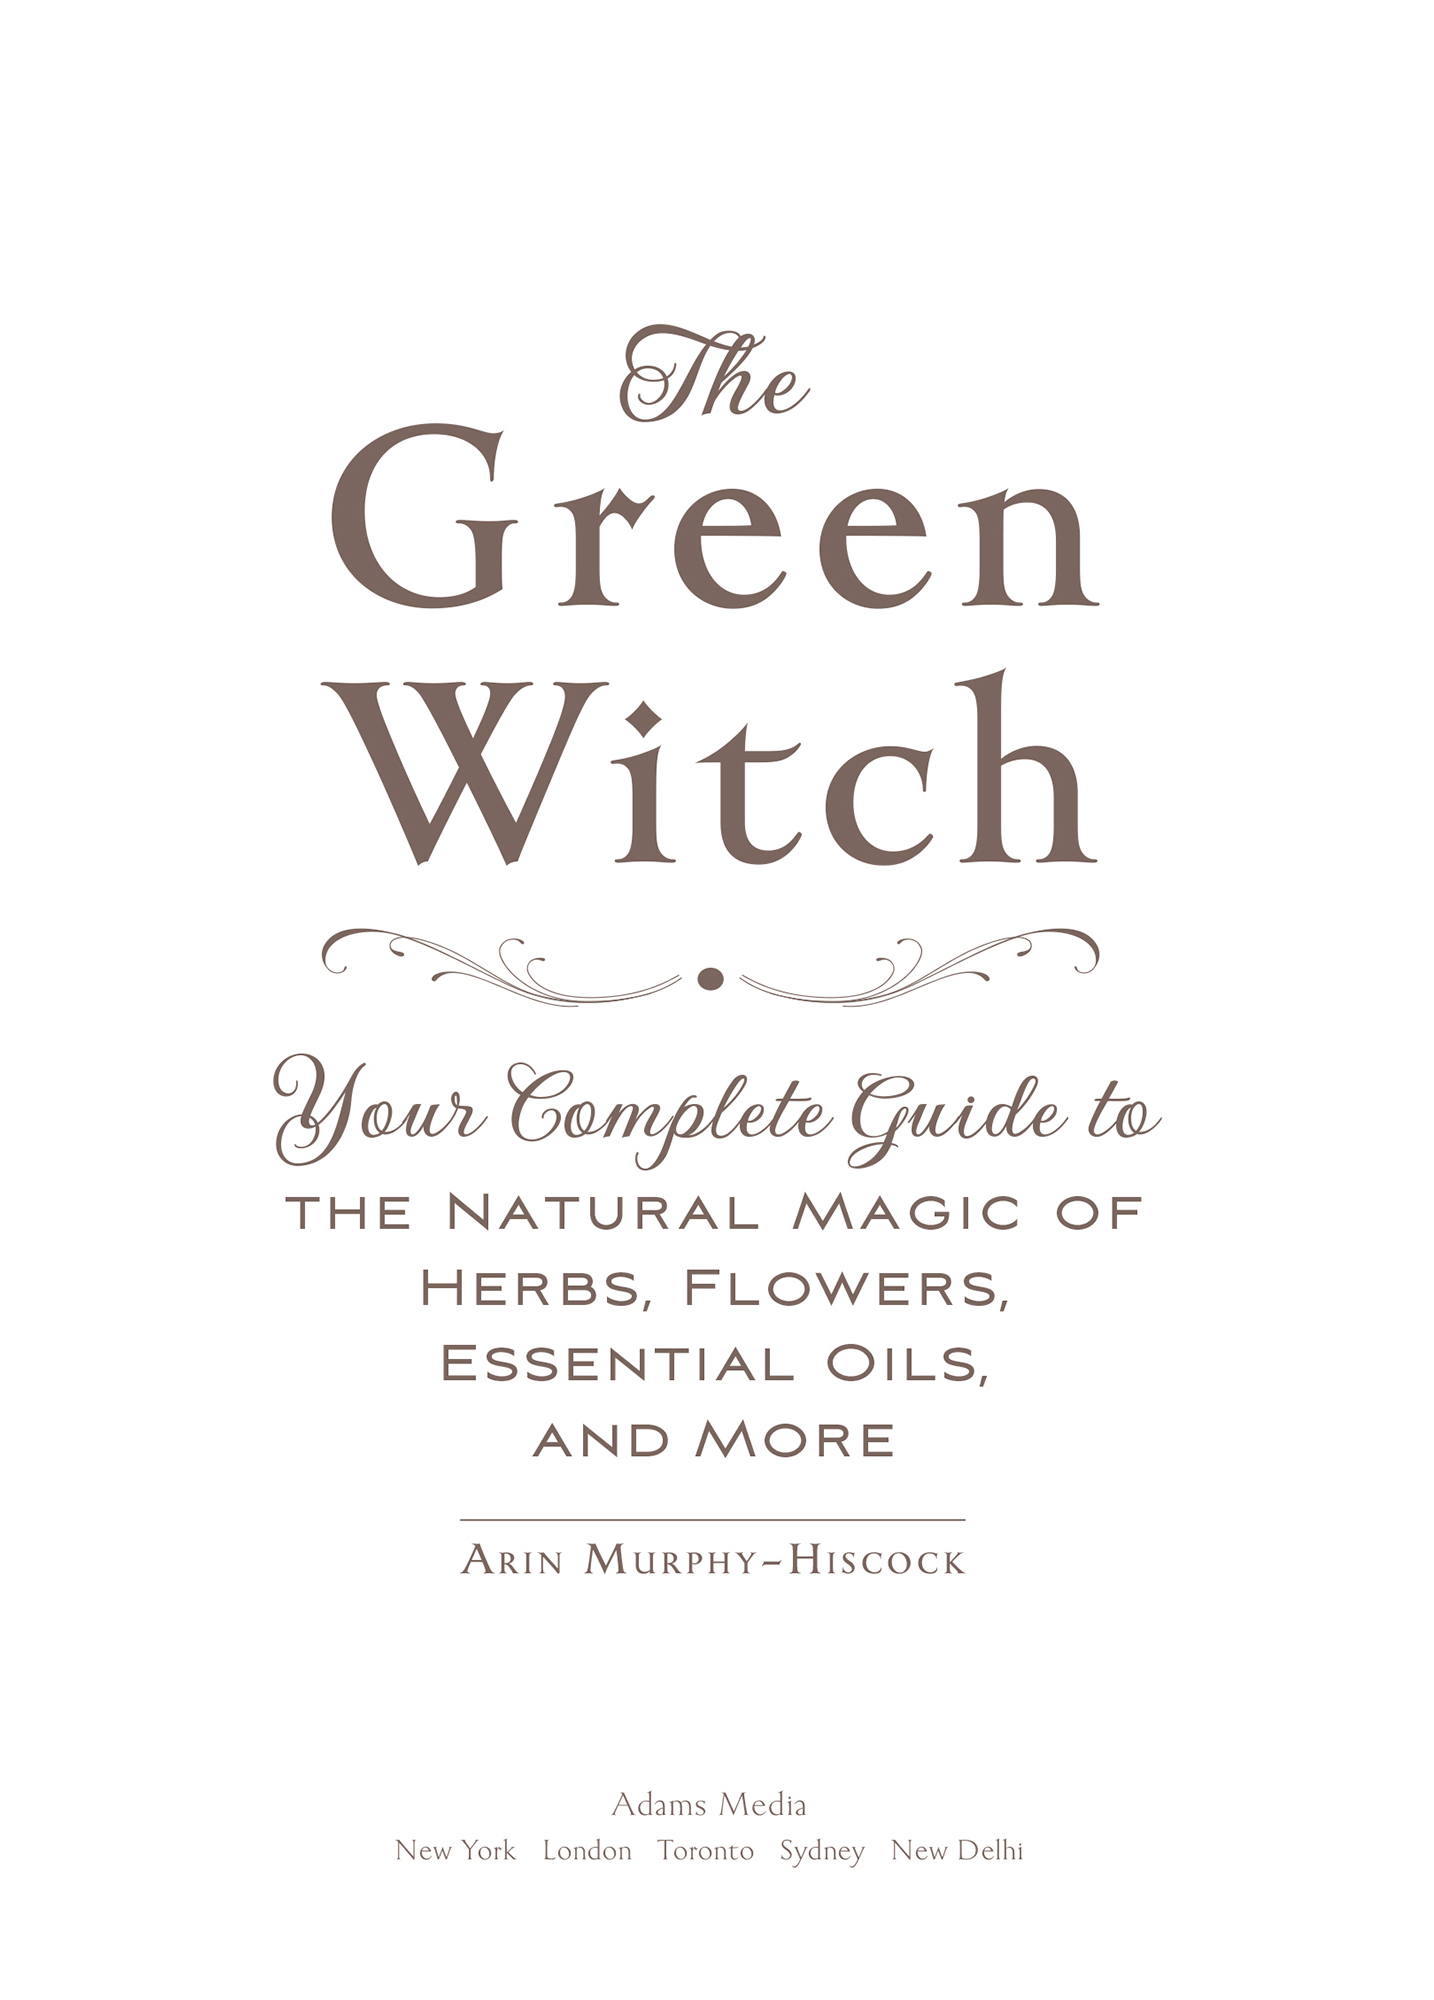 The Green Witch Your Complete Guide to the Natural Magic of Herbs Flowers Essential Oils and More - image 2